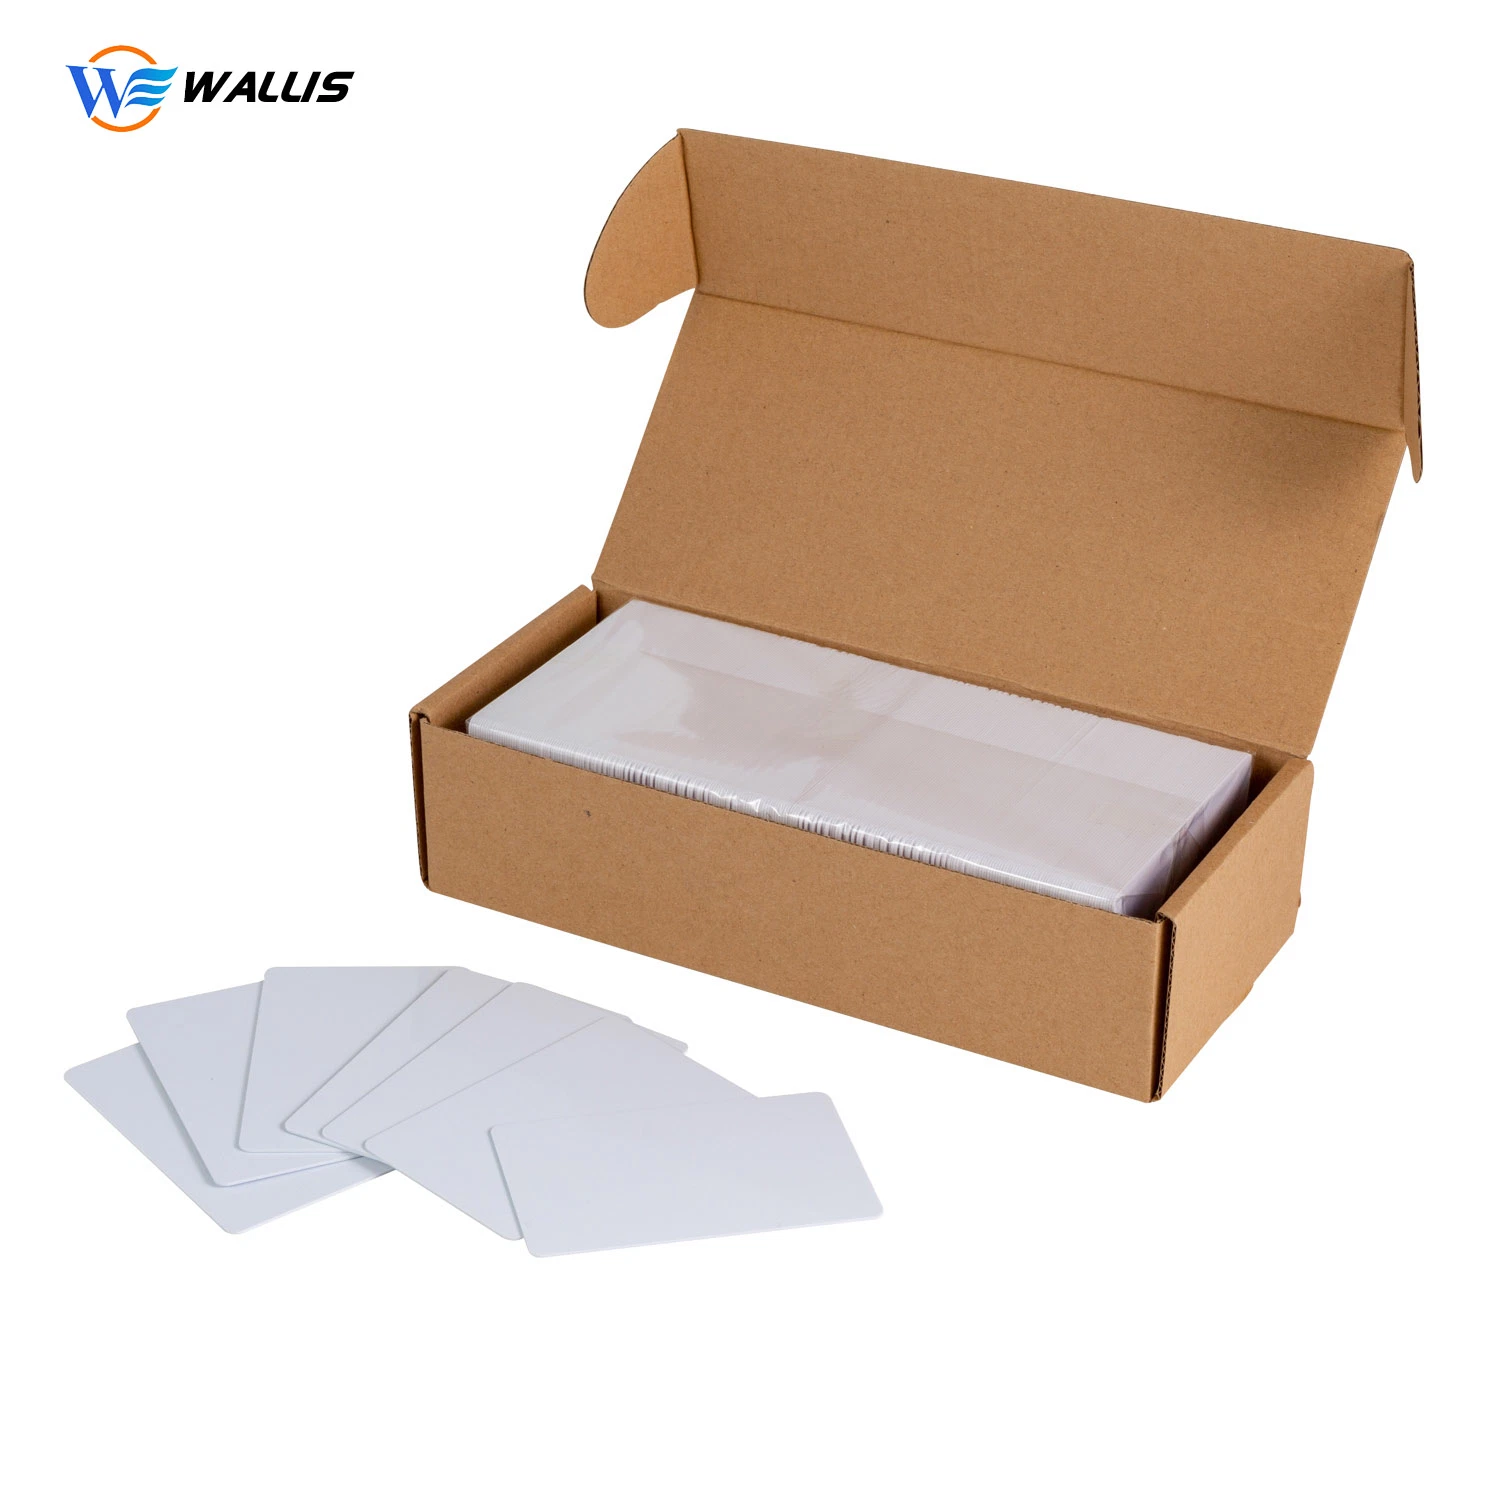 Full Color Printing Private Design Logo Transparent White Blank Card Embossed PVC Business Name Card